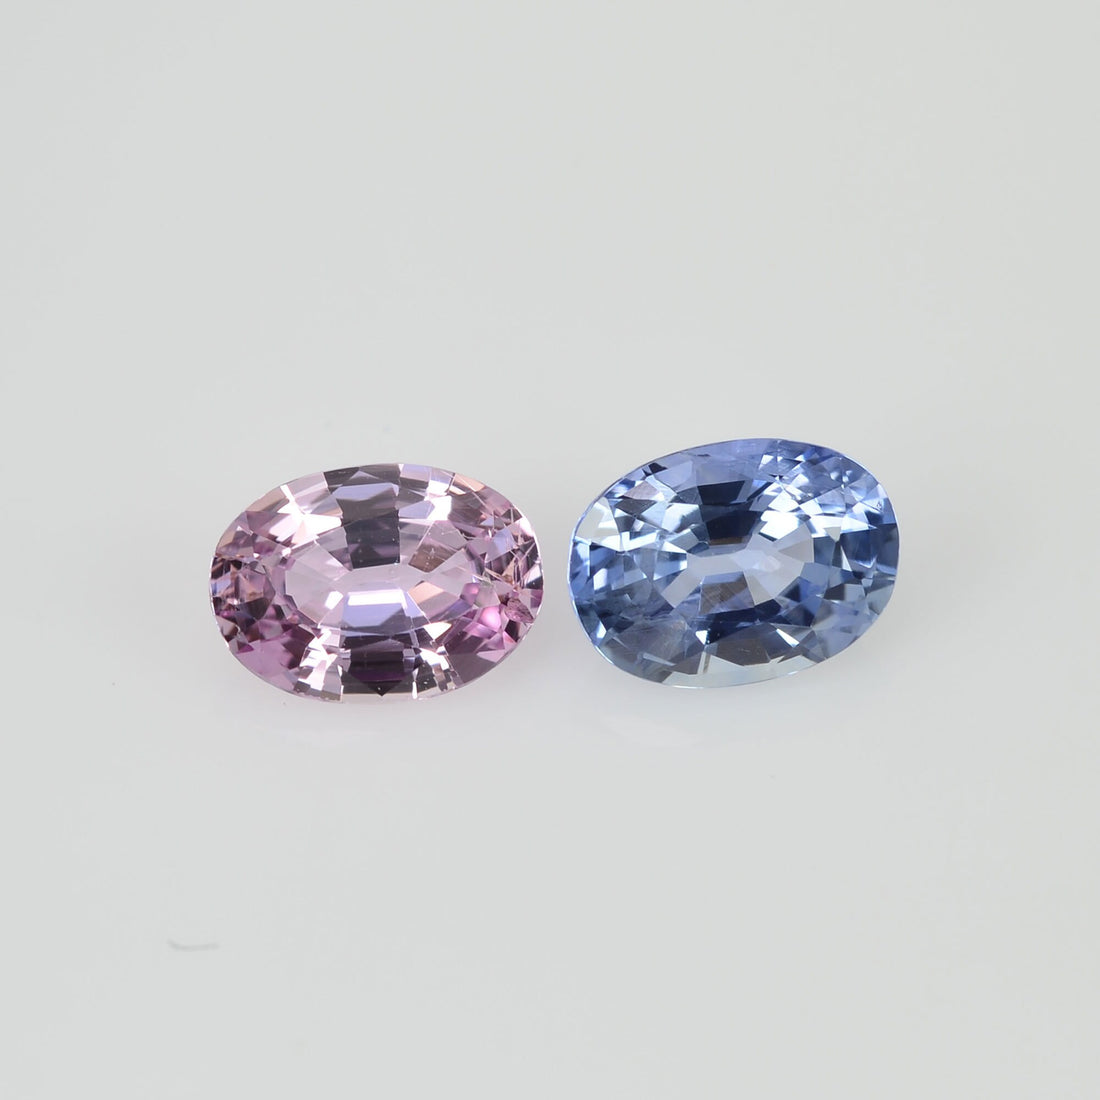 1.73 cts Natural Fancy Sapphire Loose Pair Gemstone Oval Cut